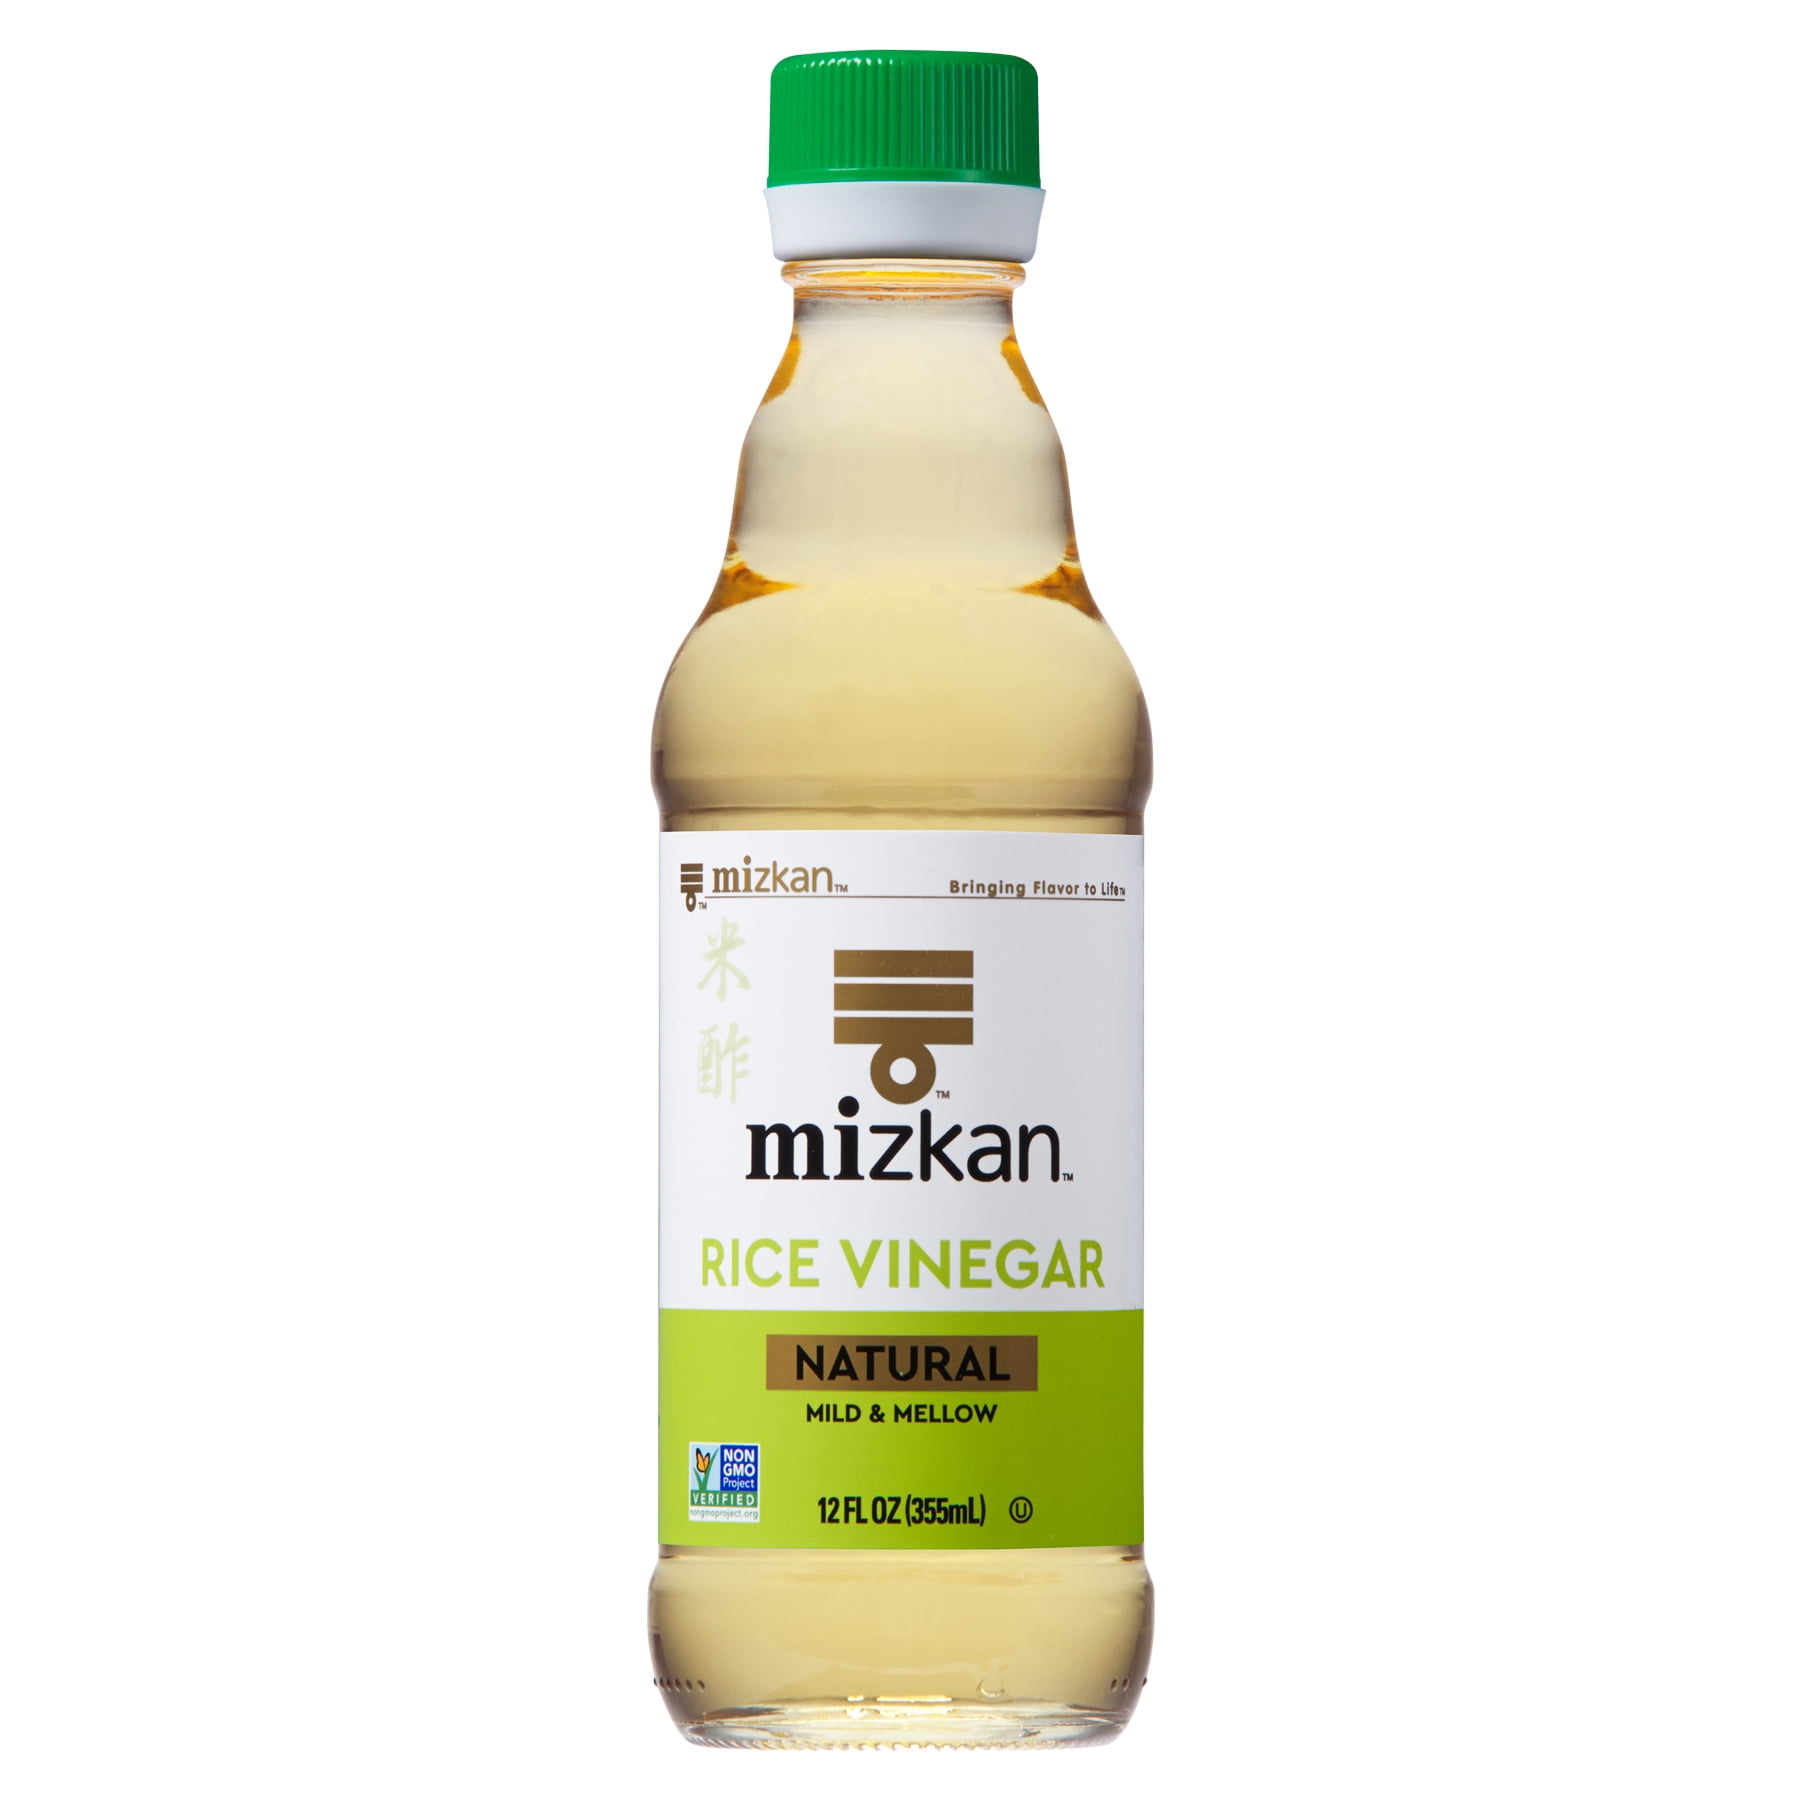 Mizkan Rice Vinegar for Authentic Japanese Dishes, Vegetables, Sushi, Chicken Teriyaki, Stir Fry Sauce and More, Non-GMO, Mild and Mellow Cooking Vinegar, 12 FL OZ